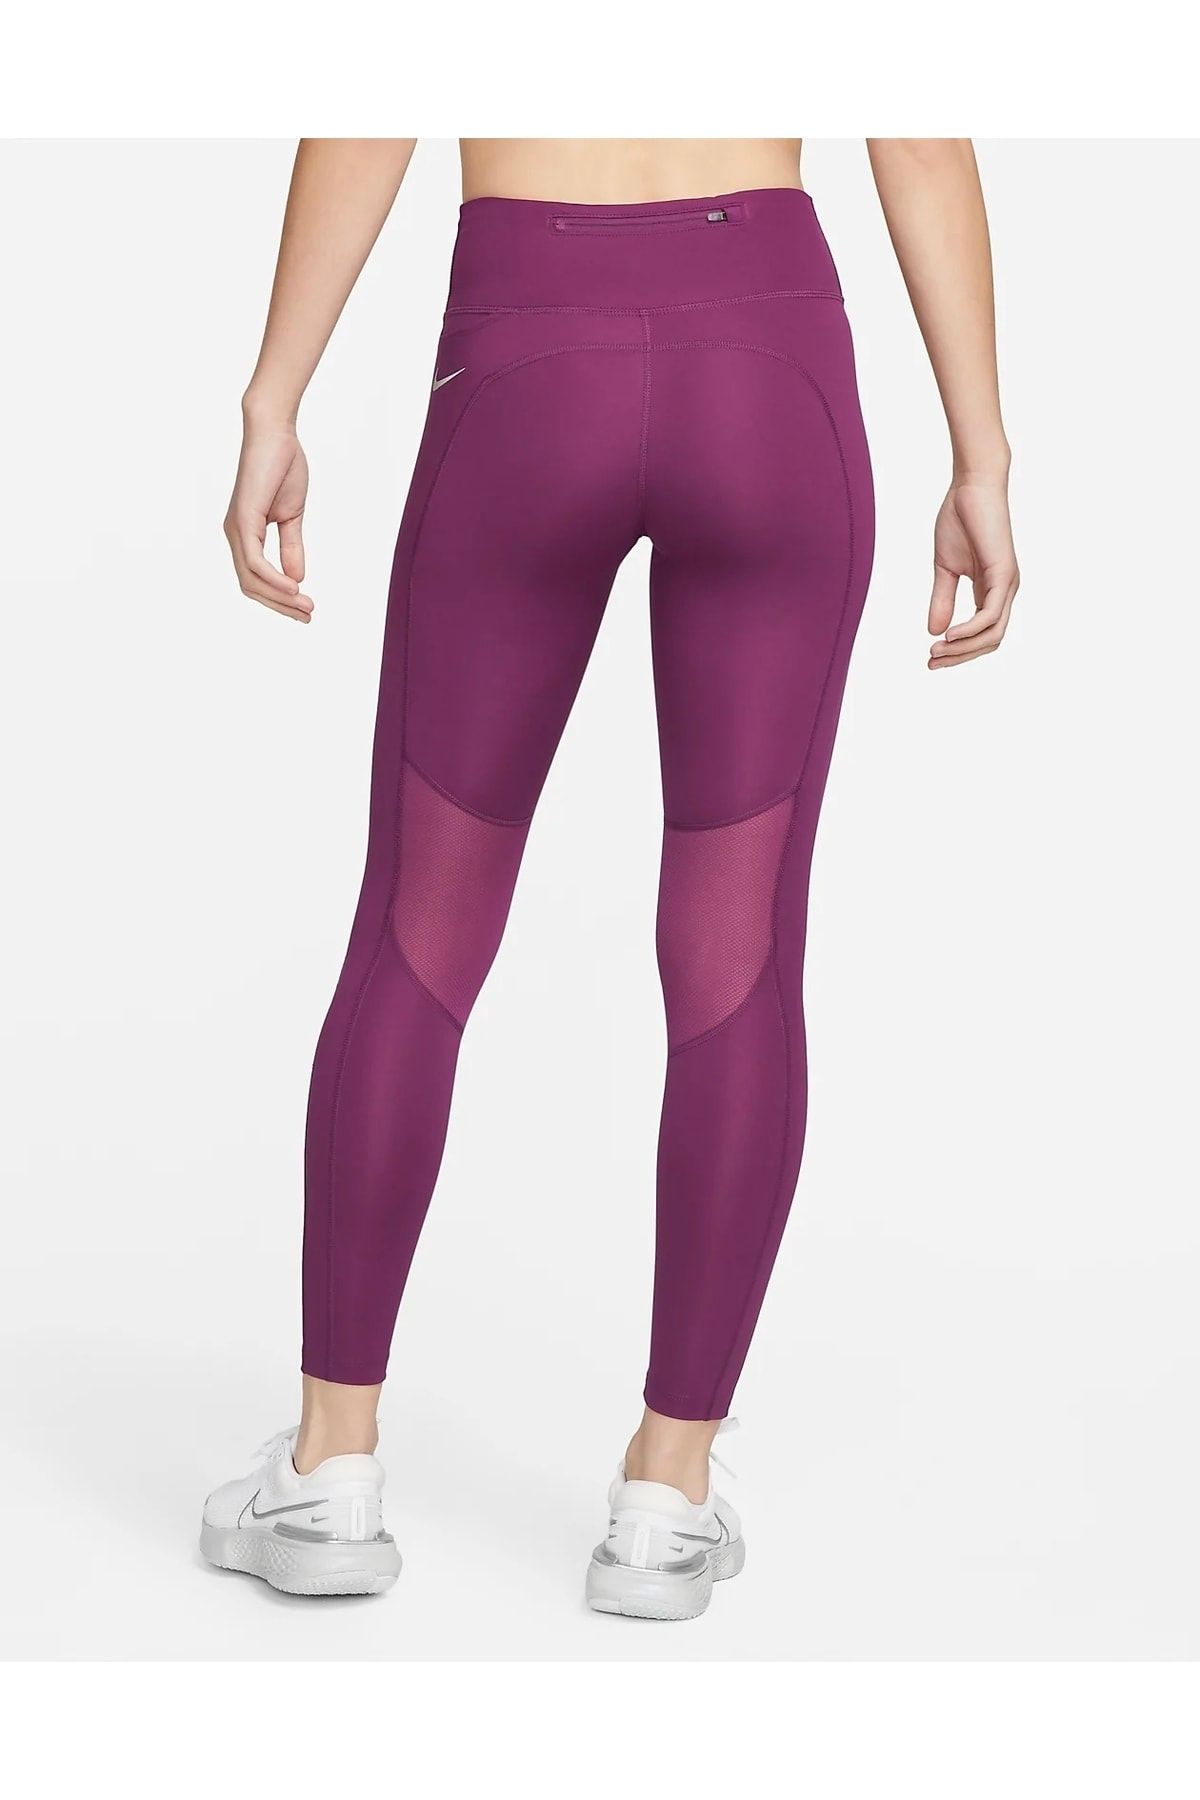 Nike Epic Fast Normal Waisted Women's Running Tights with Pockets